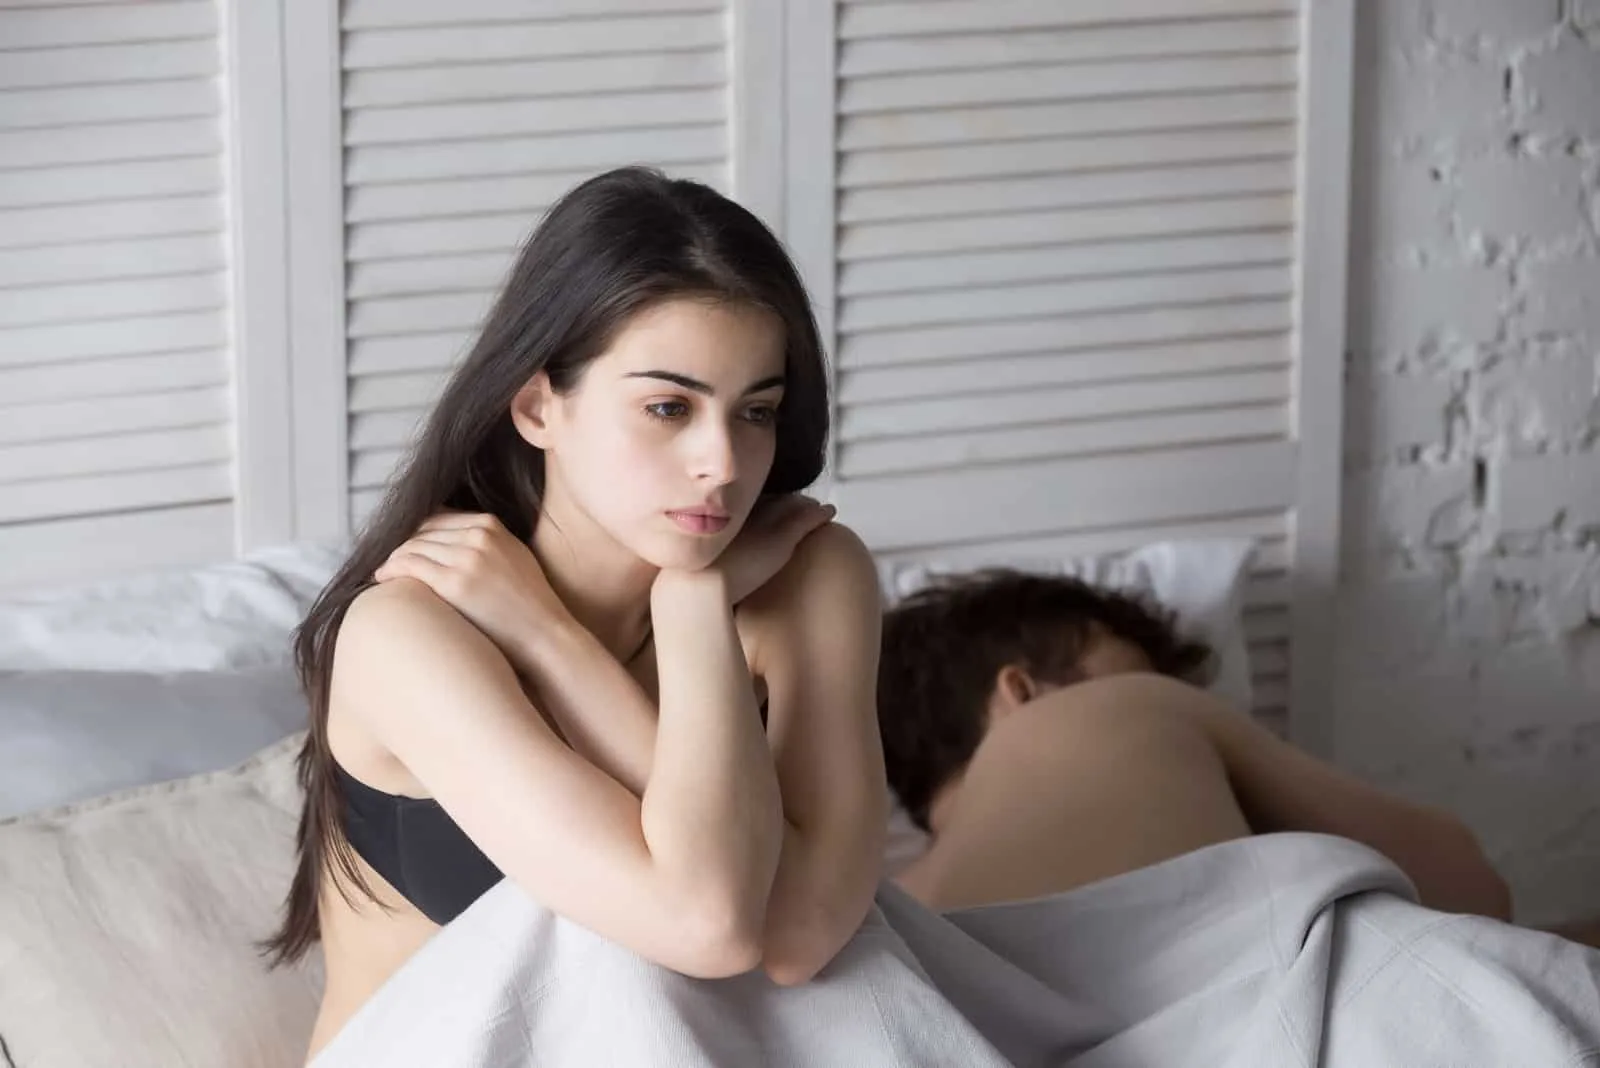 man ignoring woman in bed